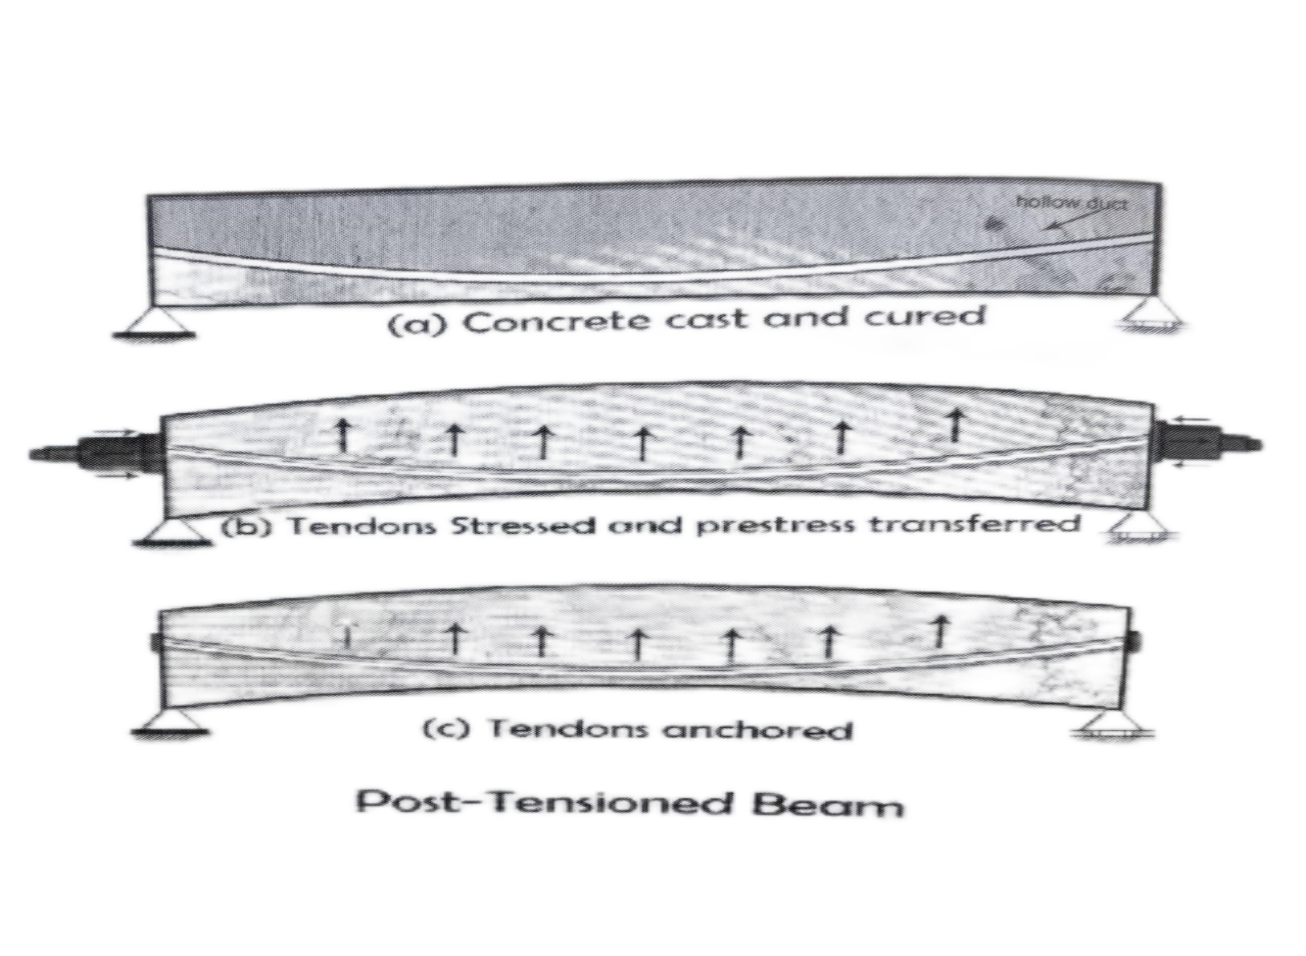 INTRODUCTION TO POST-TENSIONING SYSTEM